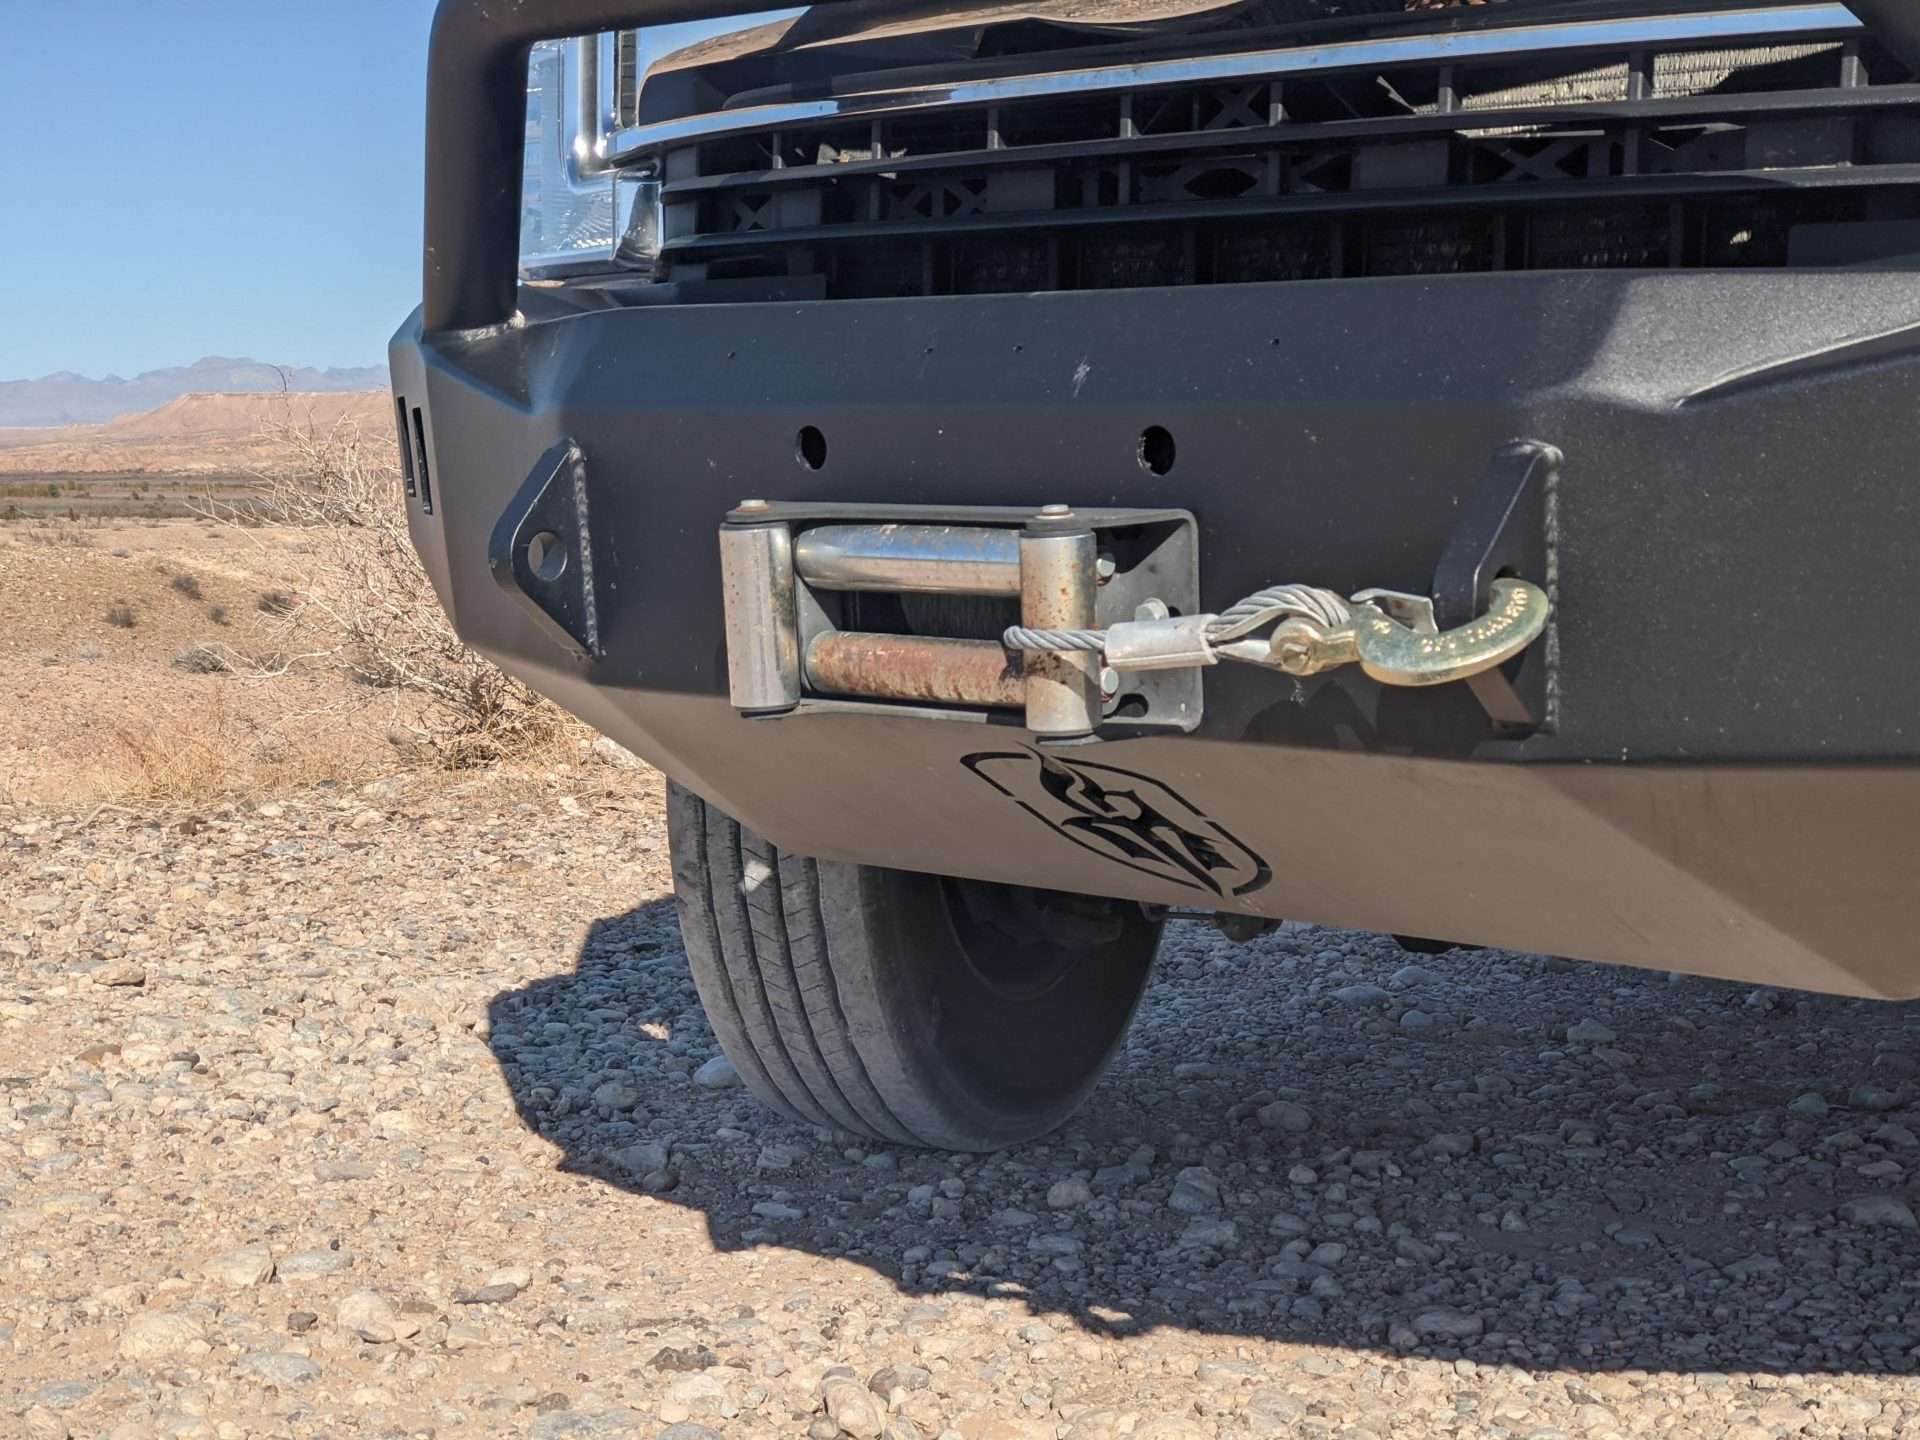 Close up on truck bumper with installed winch.